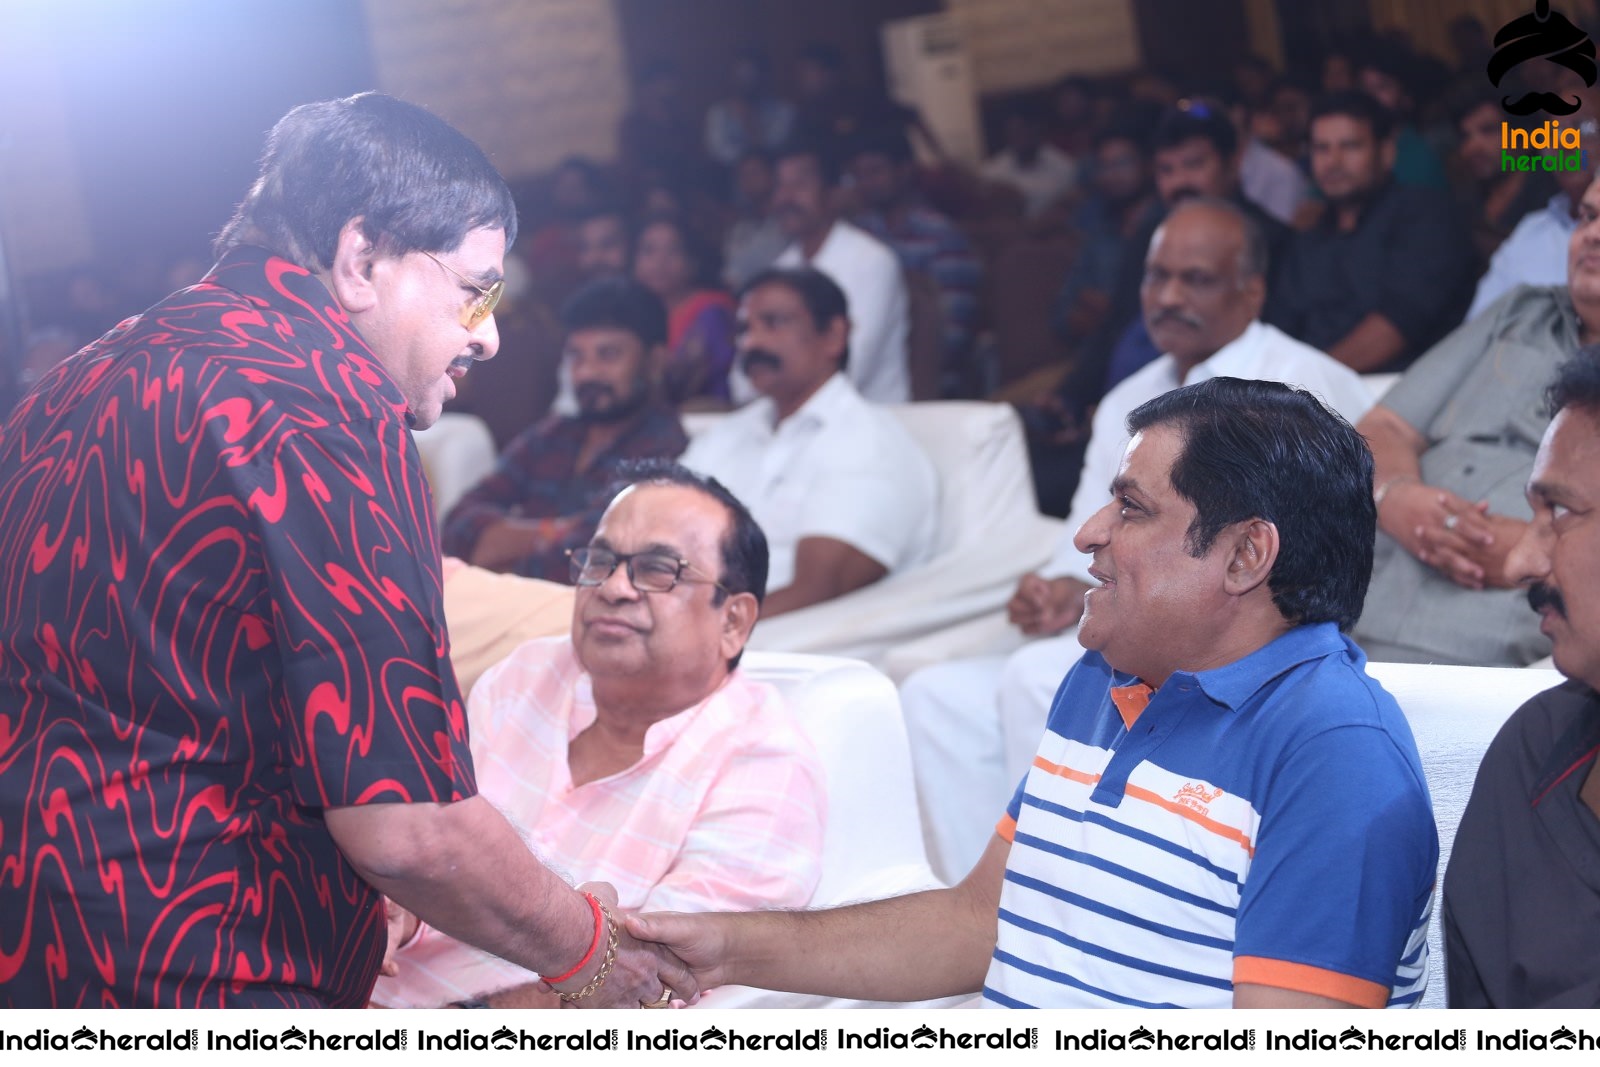 Legendary Comedy Actors Brahmanandam and Ali share a light moment